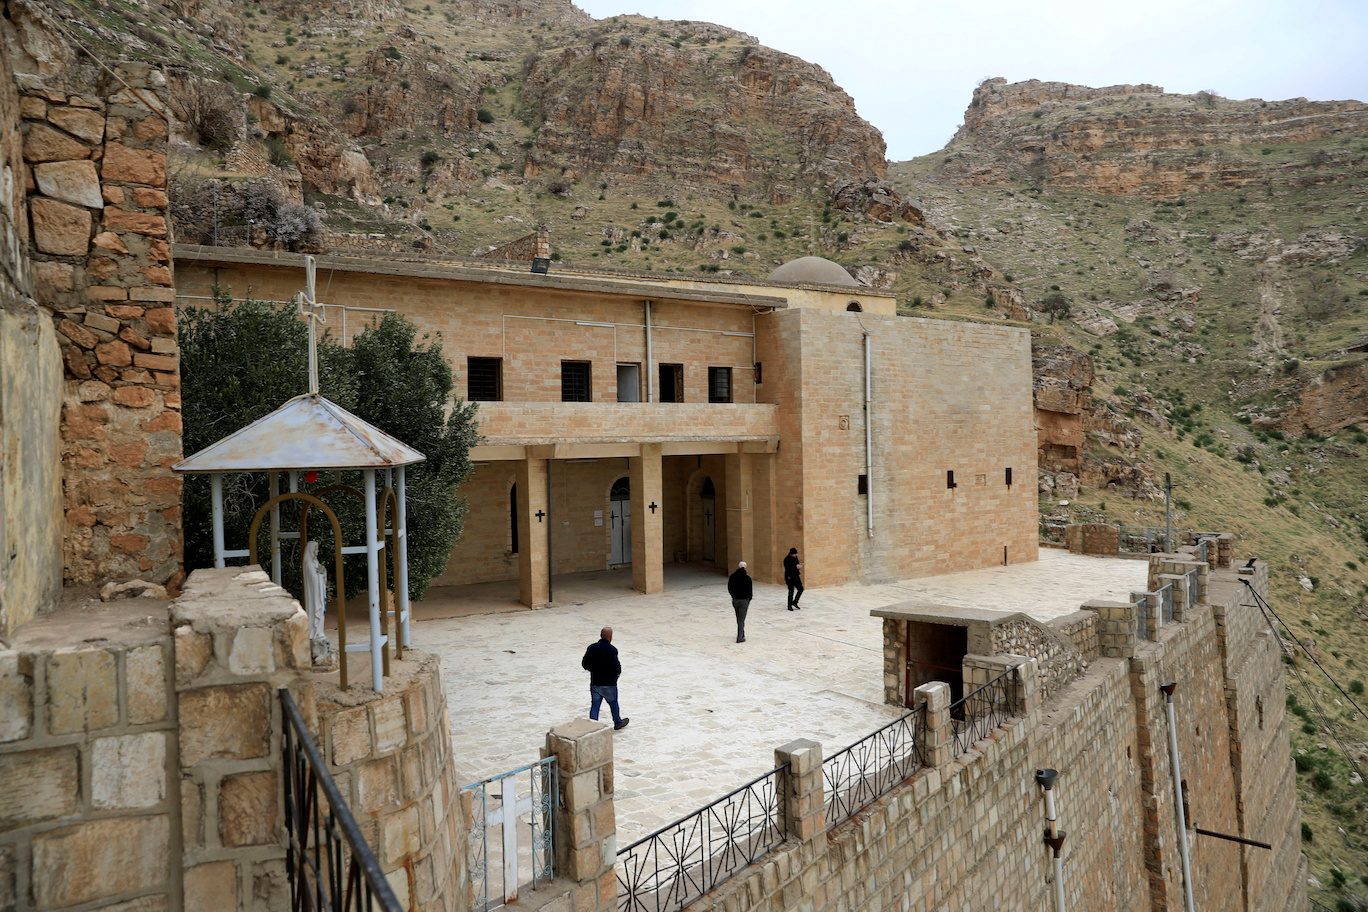 An ancient monastery in Iraq is a symbol of Christian survival